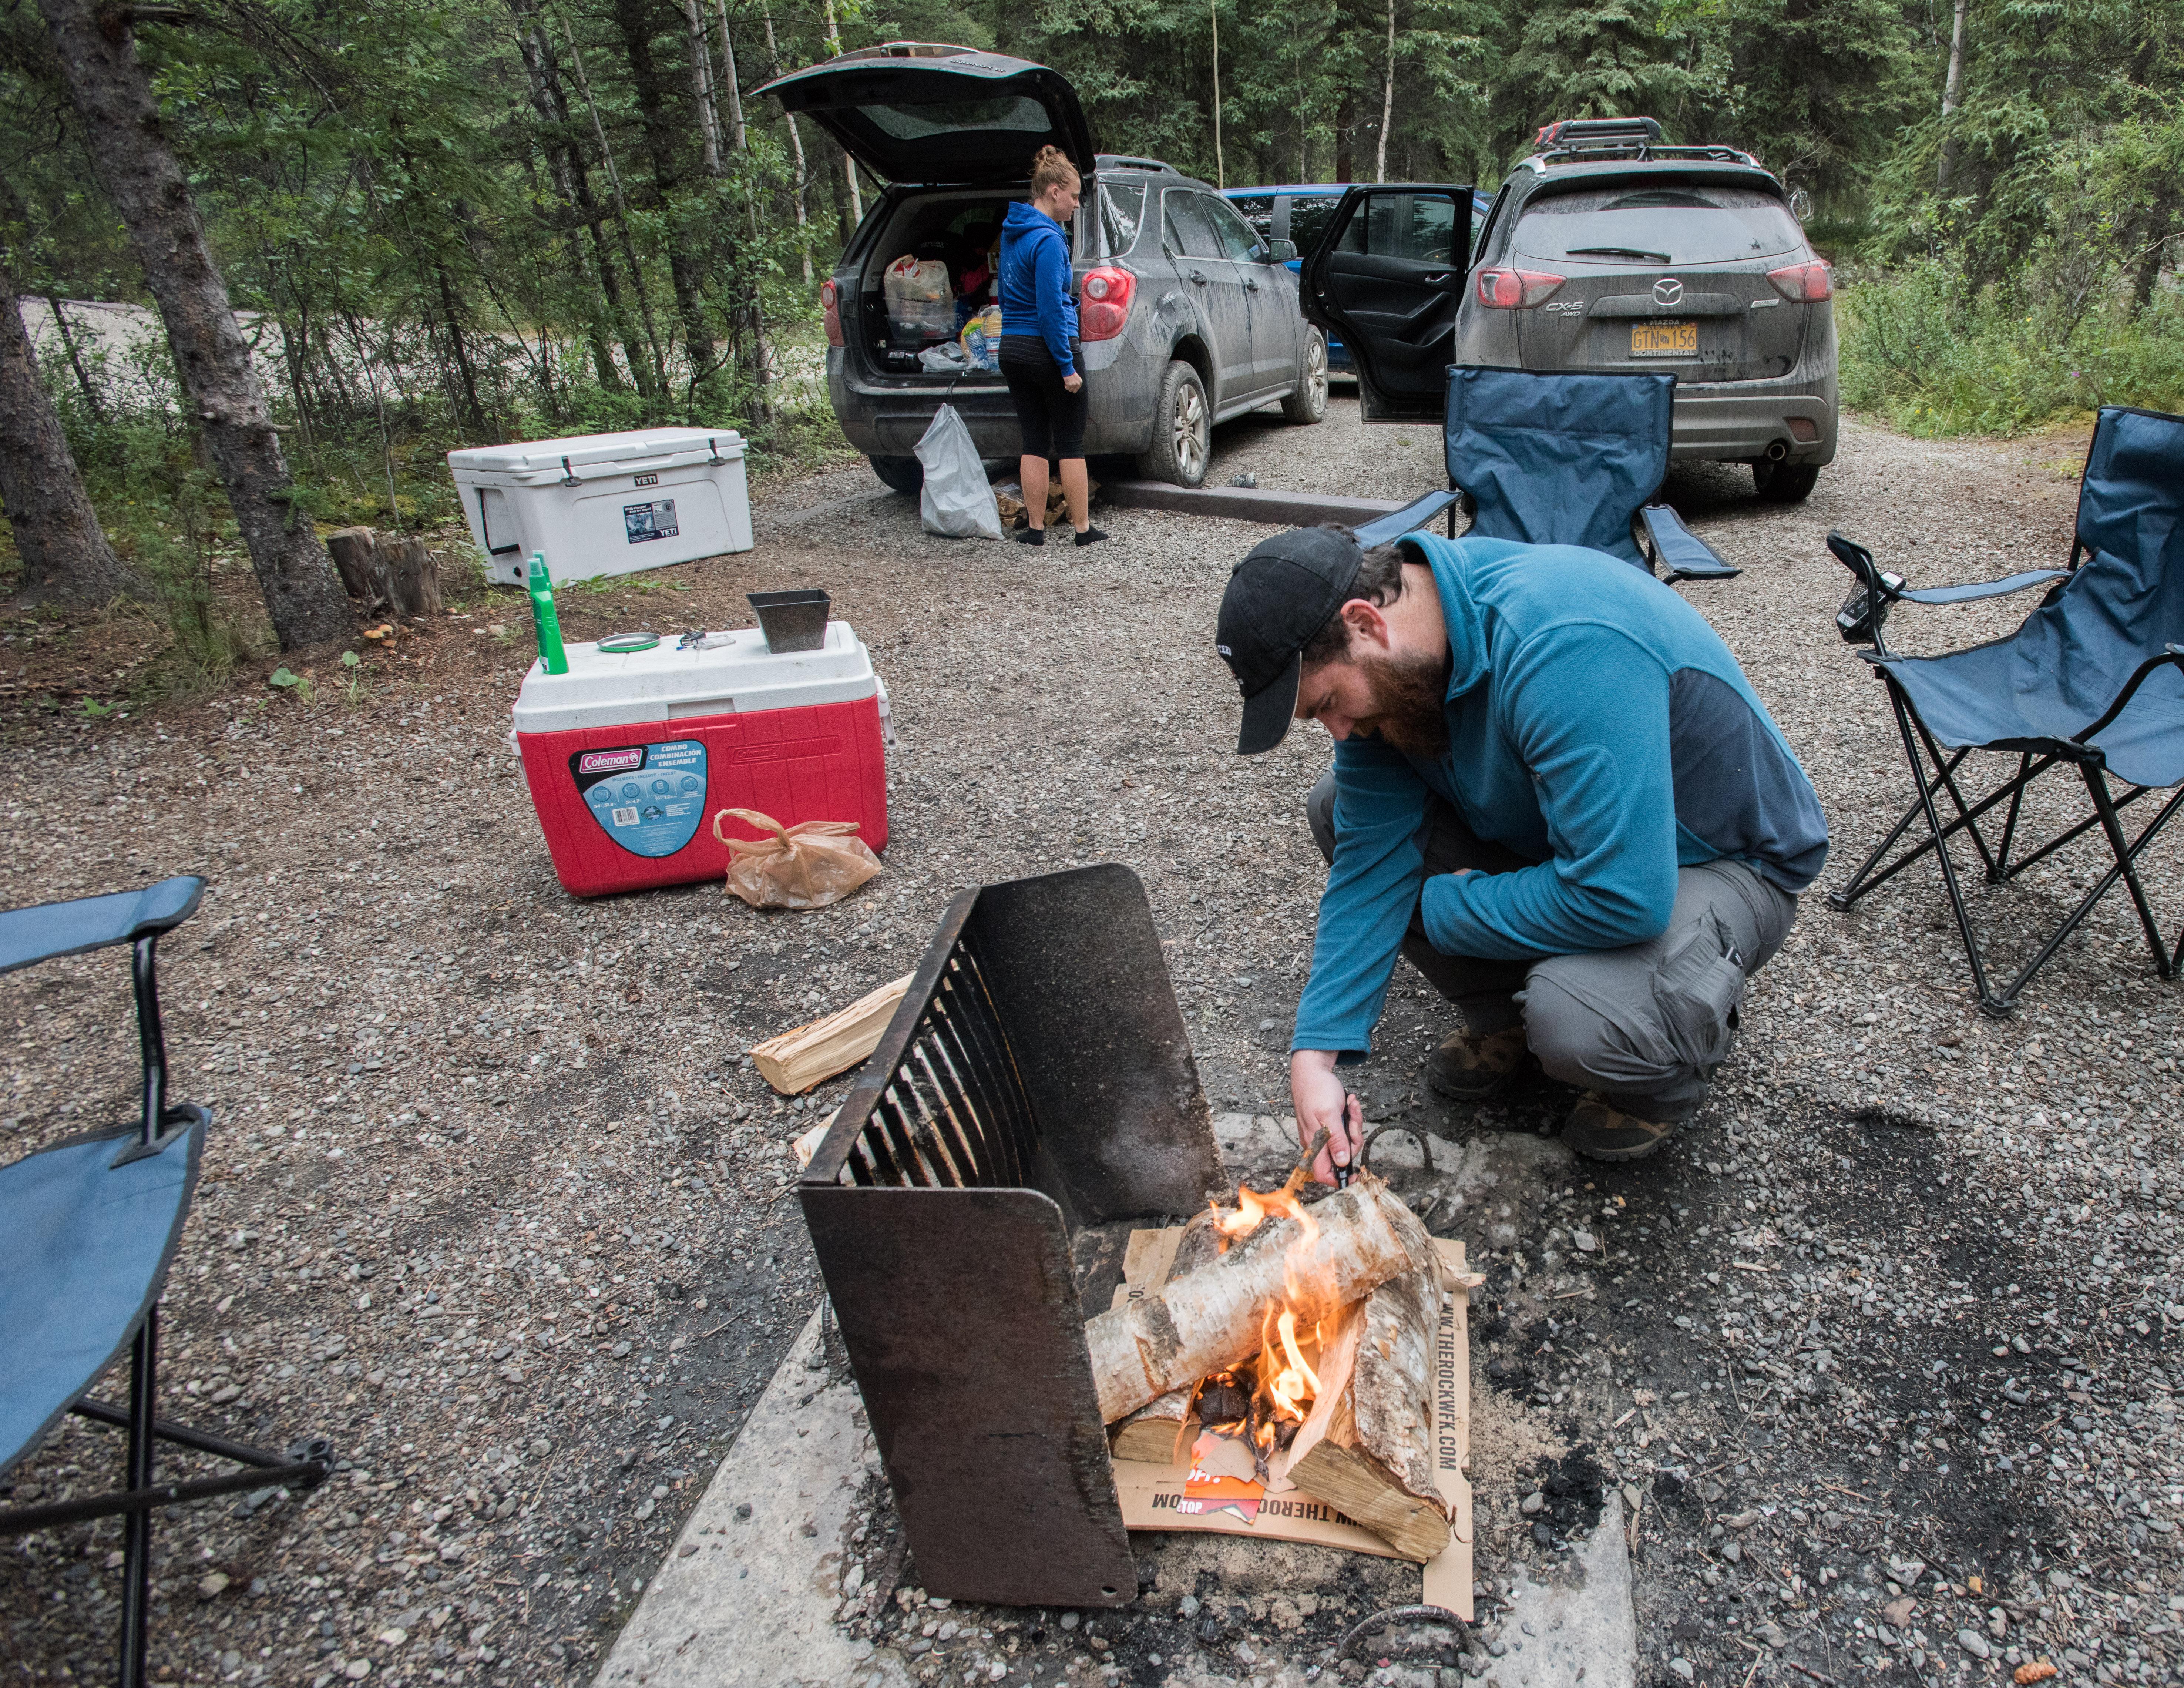 a man lighting a campfire, and a woman pulling gear out of a car